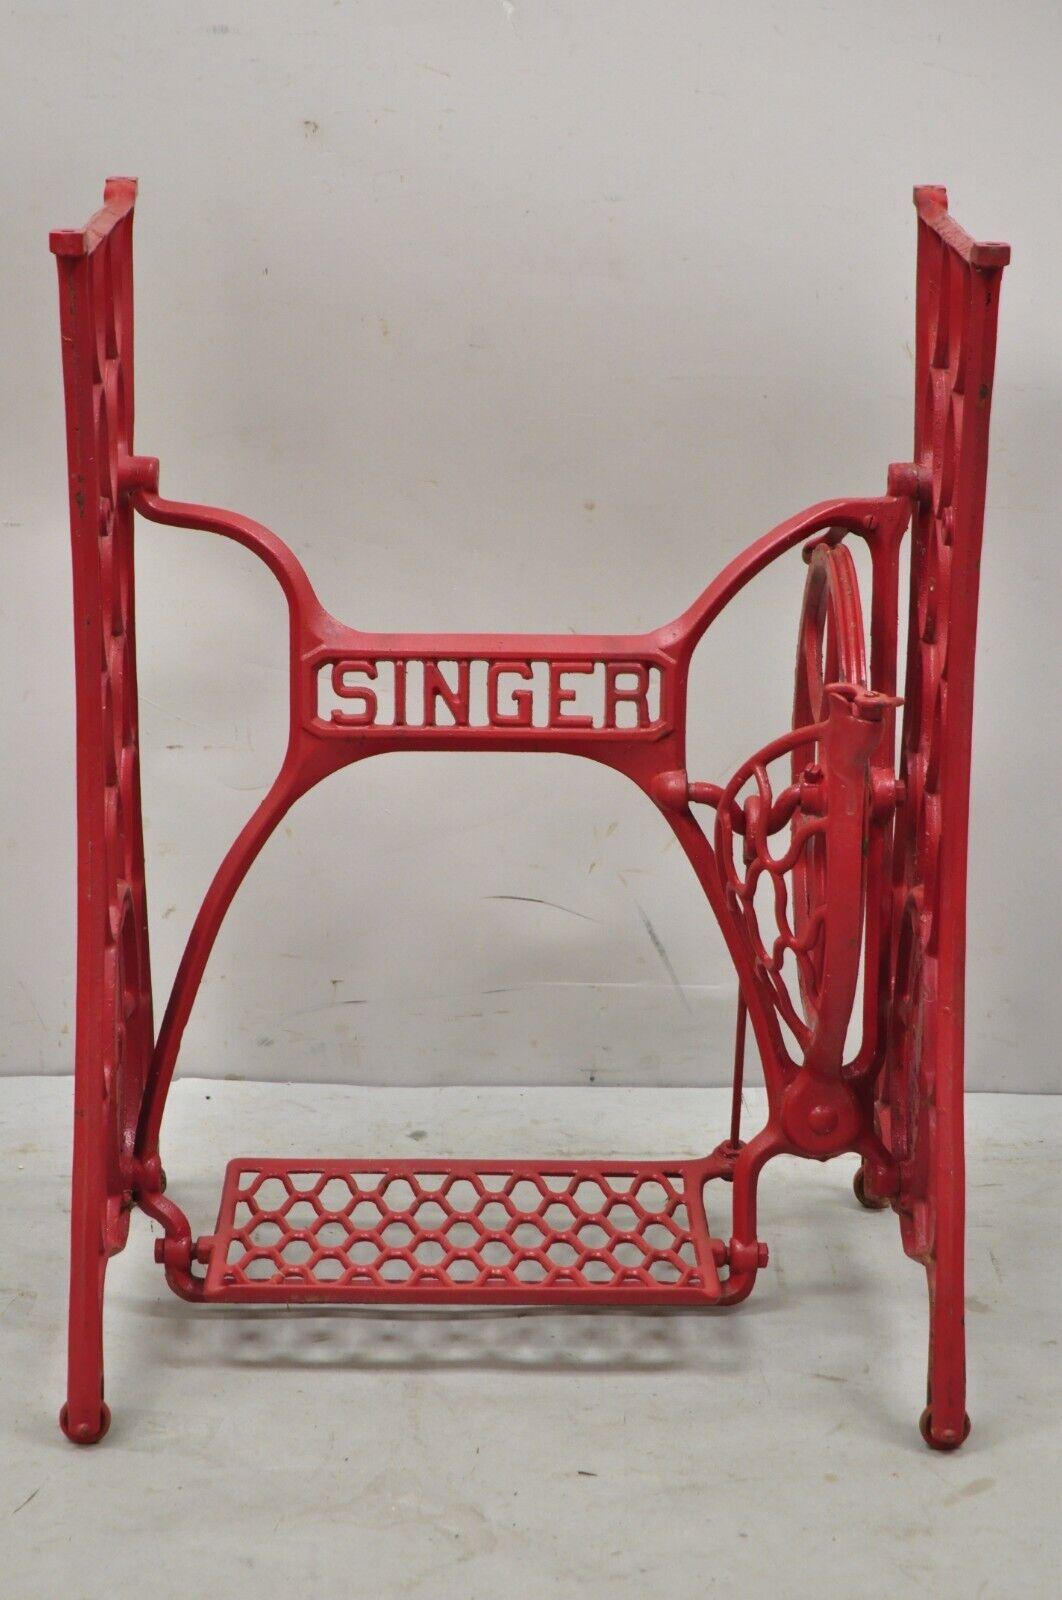 Antique Singer Cast Iron Red Treadle Sewing Machine Base. Item features a cast iron construction, original label, very nice vintage item, quality American craftsmanship, great to add a top. Paint is not original and appears to be a later addition.